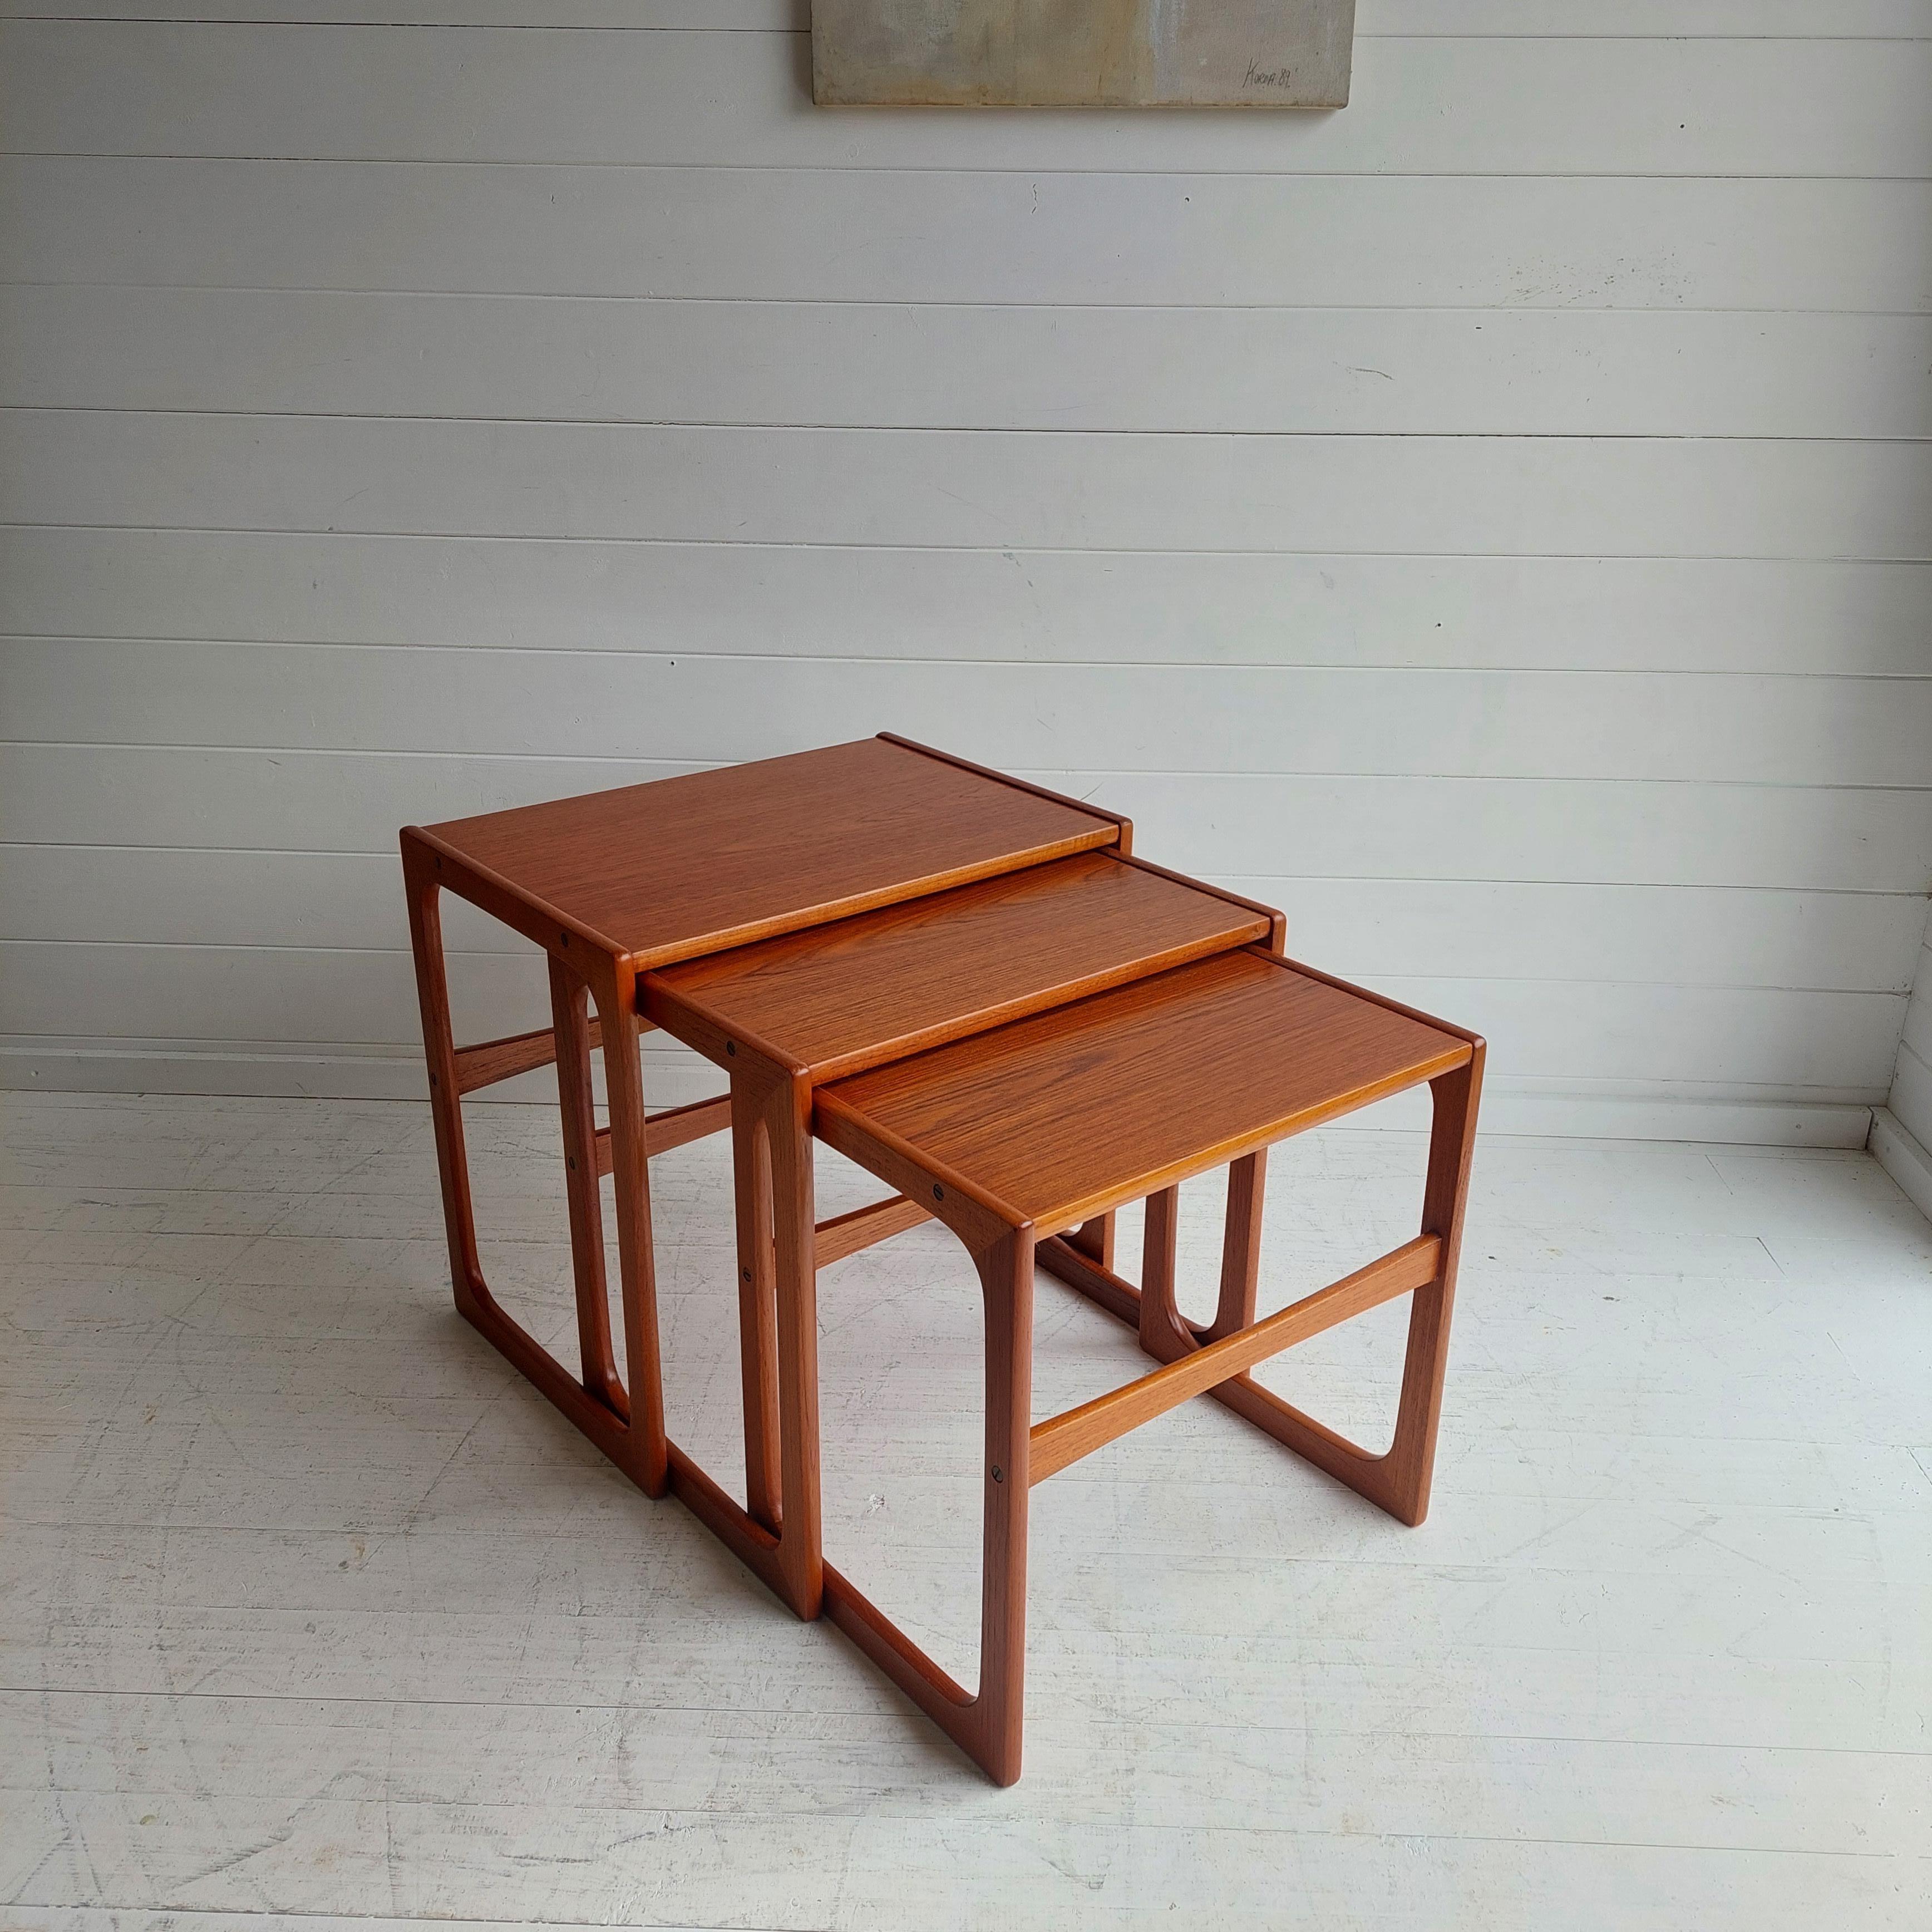 Lovely set of nesting tables from BR Gelsted, Denmark 1960s in teak.

The nest of tables has three individual tables that nest neatly underneath each other. 
A stunning original Scandinavian design with its curved shape and strong golden teak